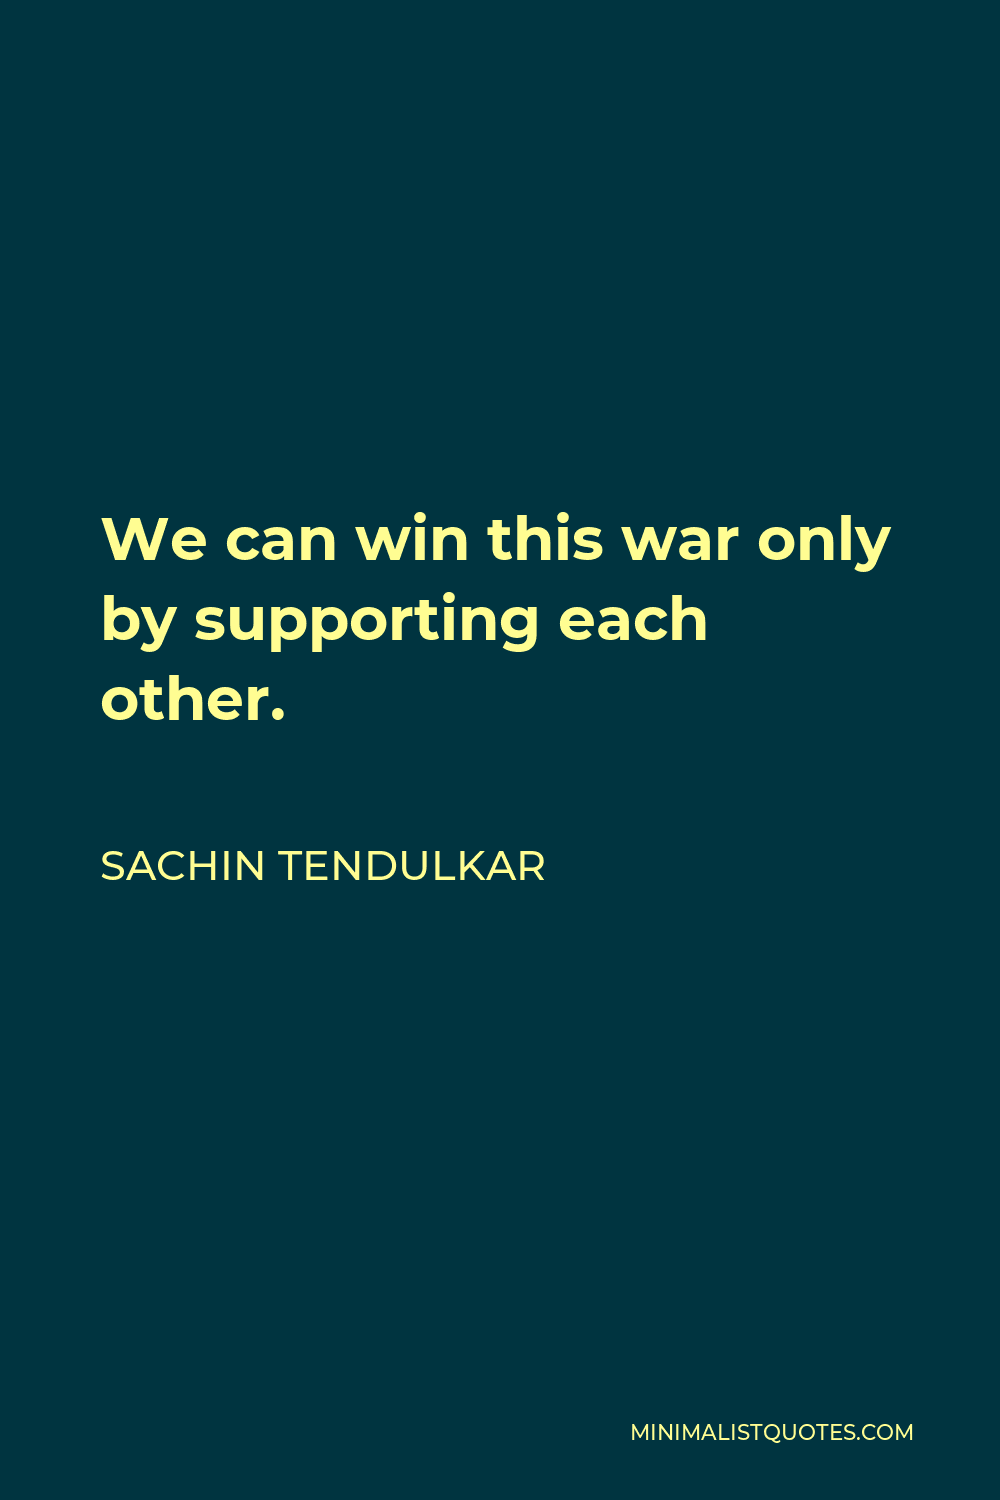 Sachin Tendulkar Quote - We can win this war only by supporting each other.